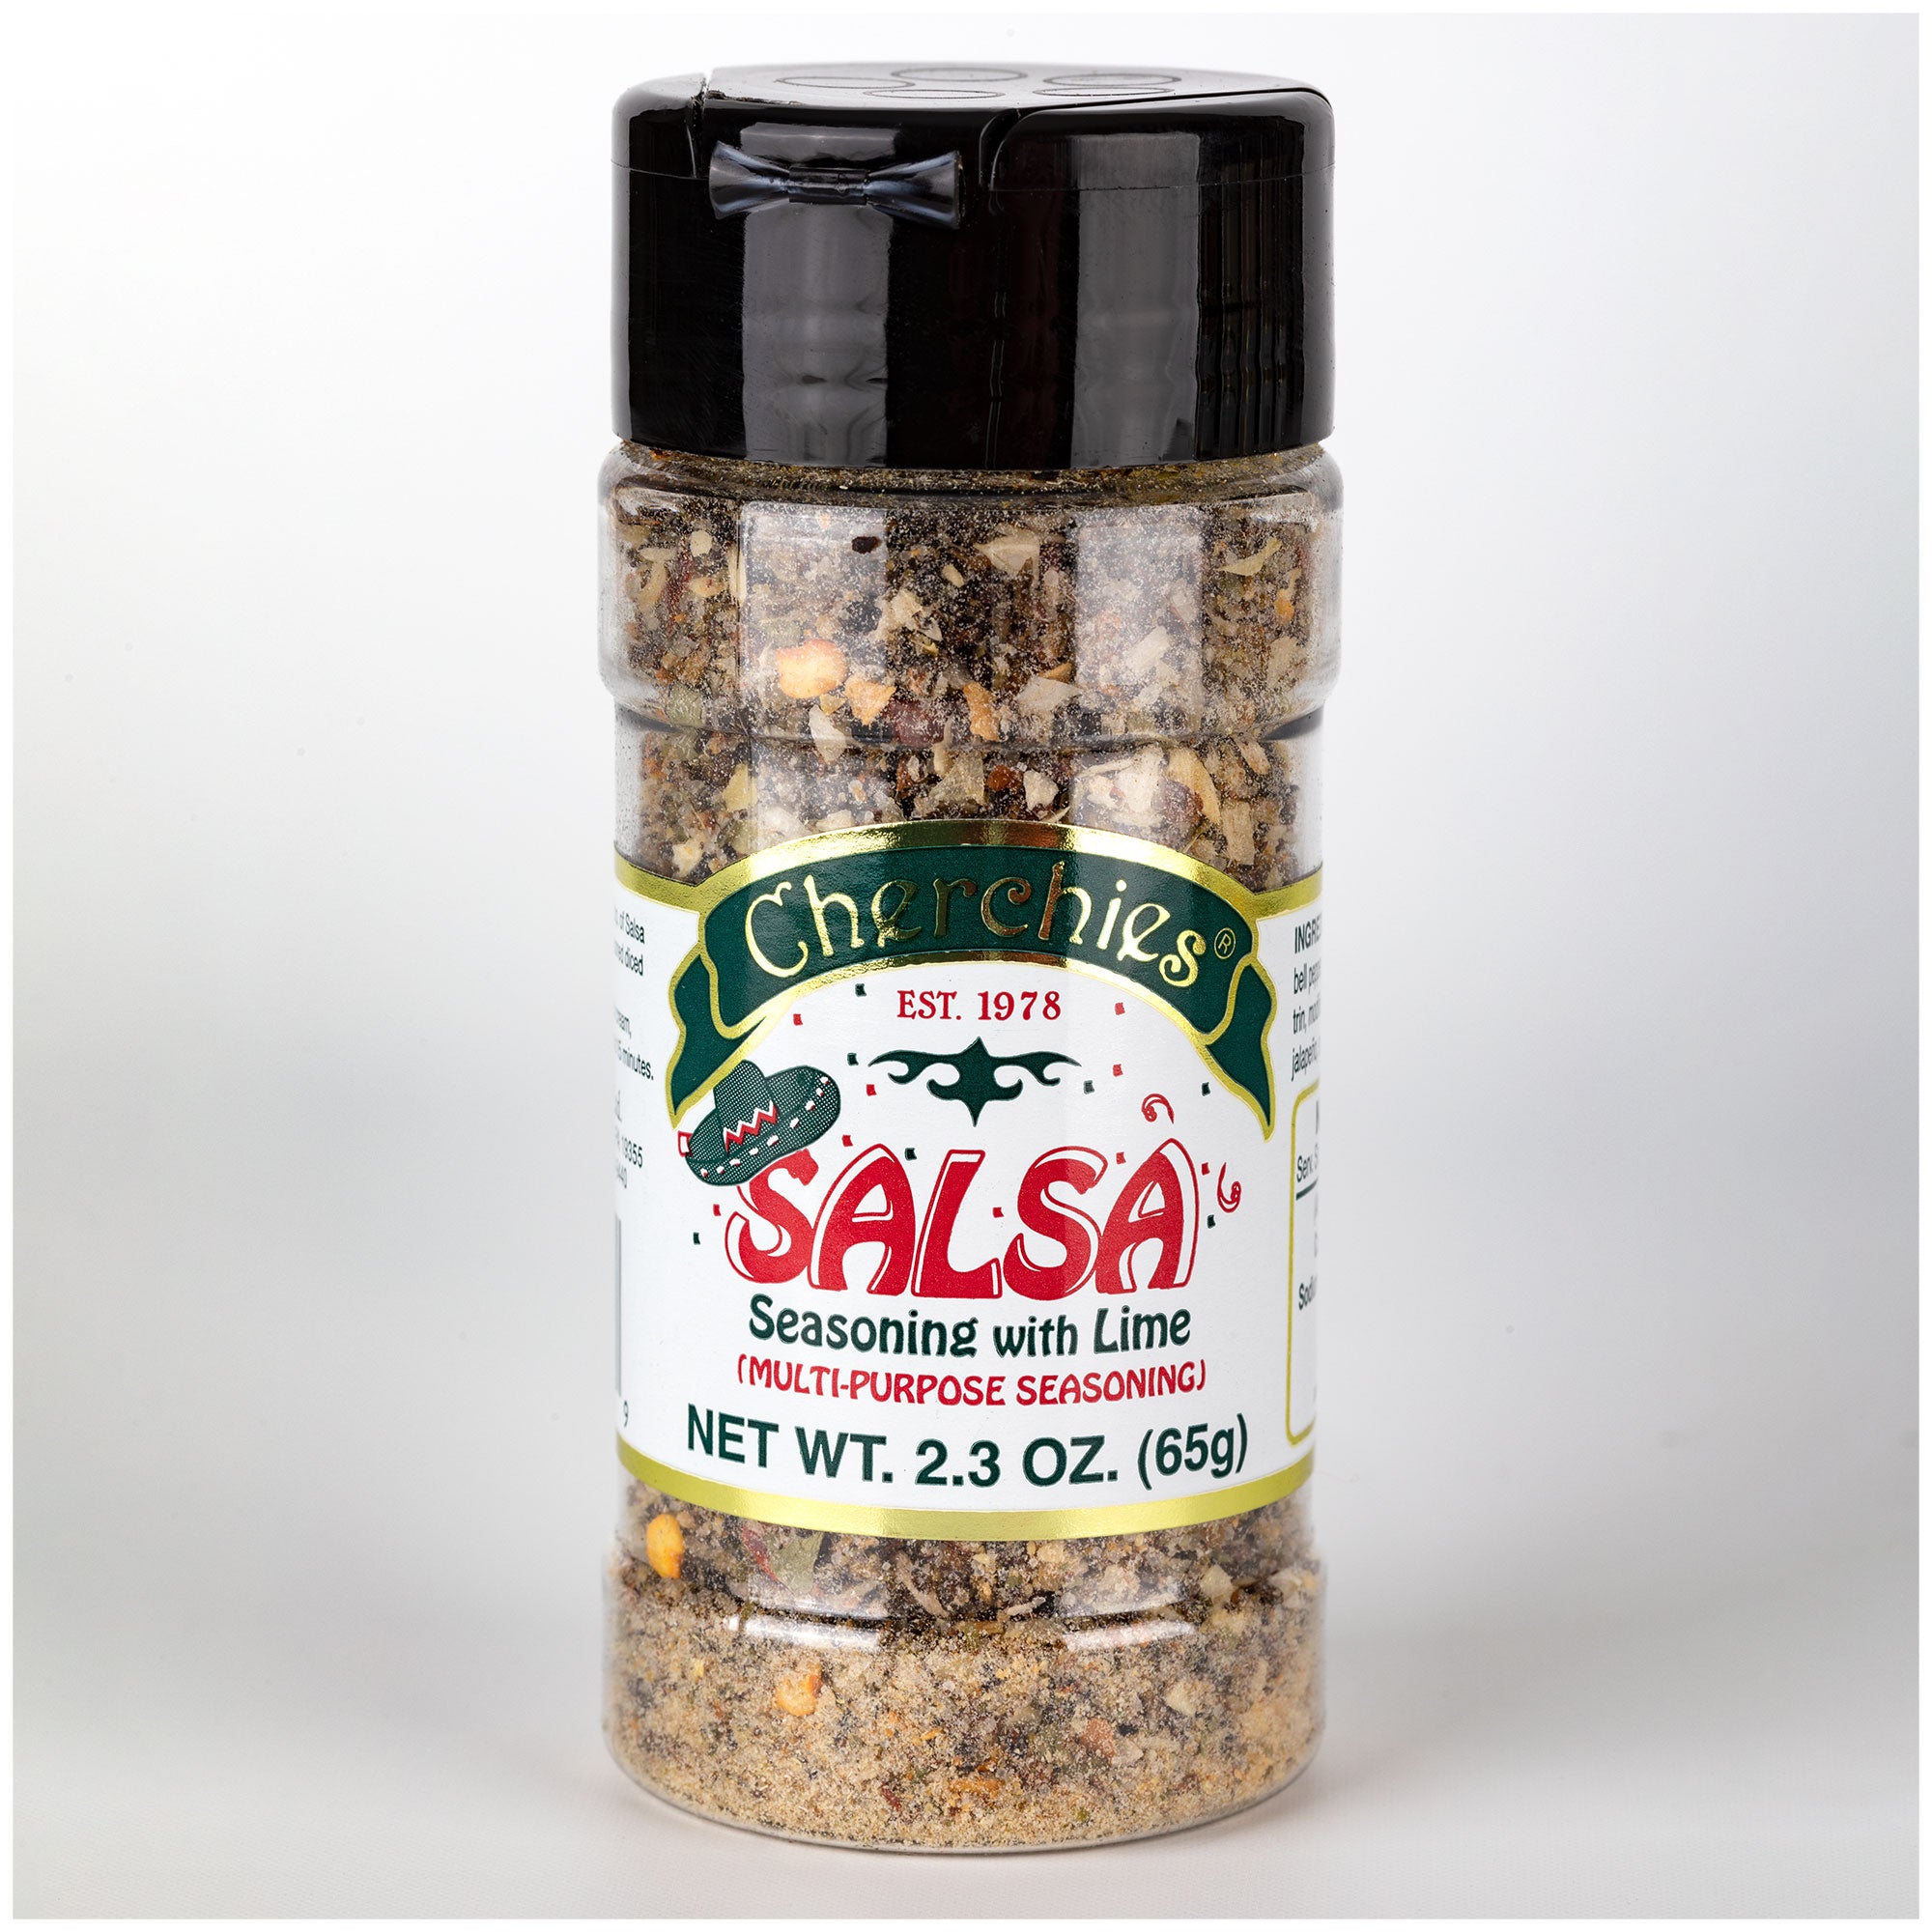 Cherchies® Famous Seasoning - Salsa With Lime